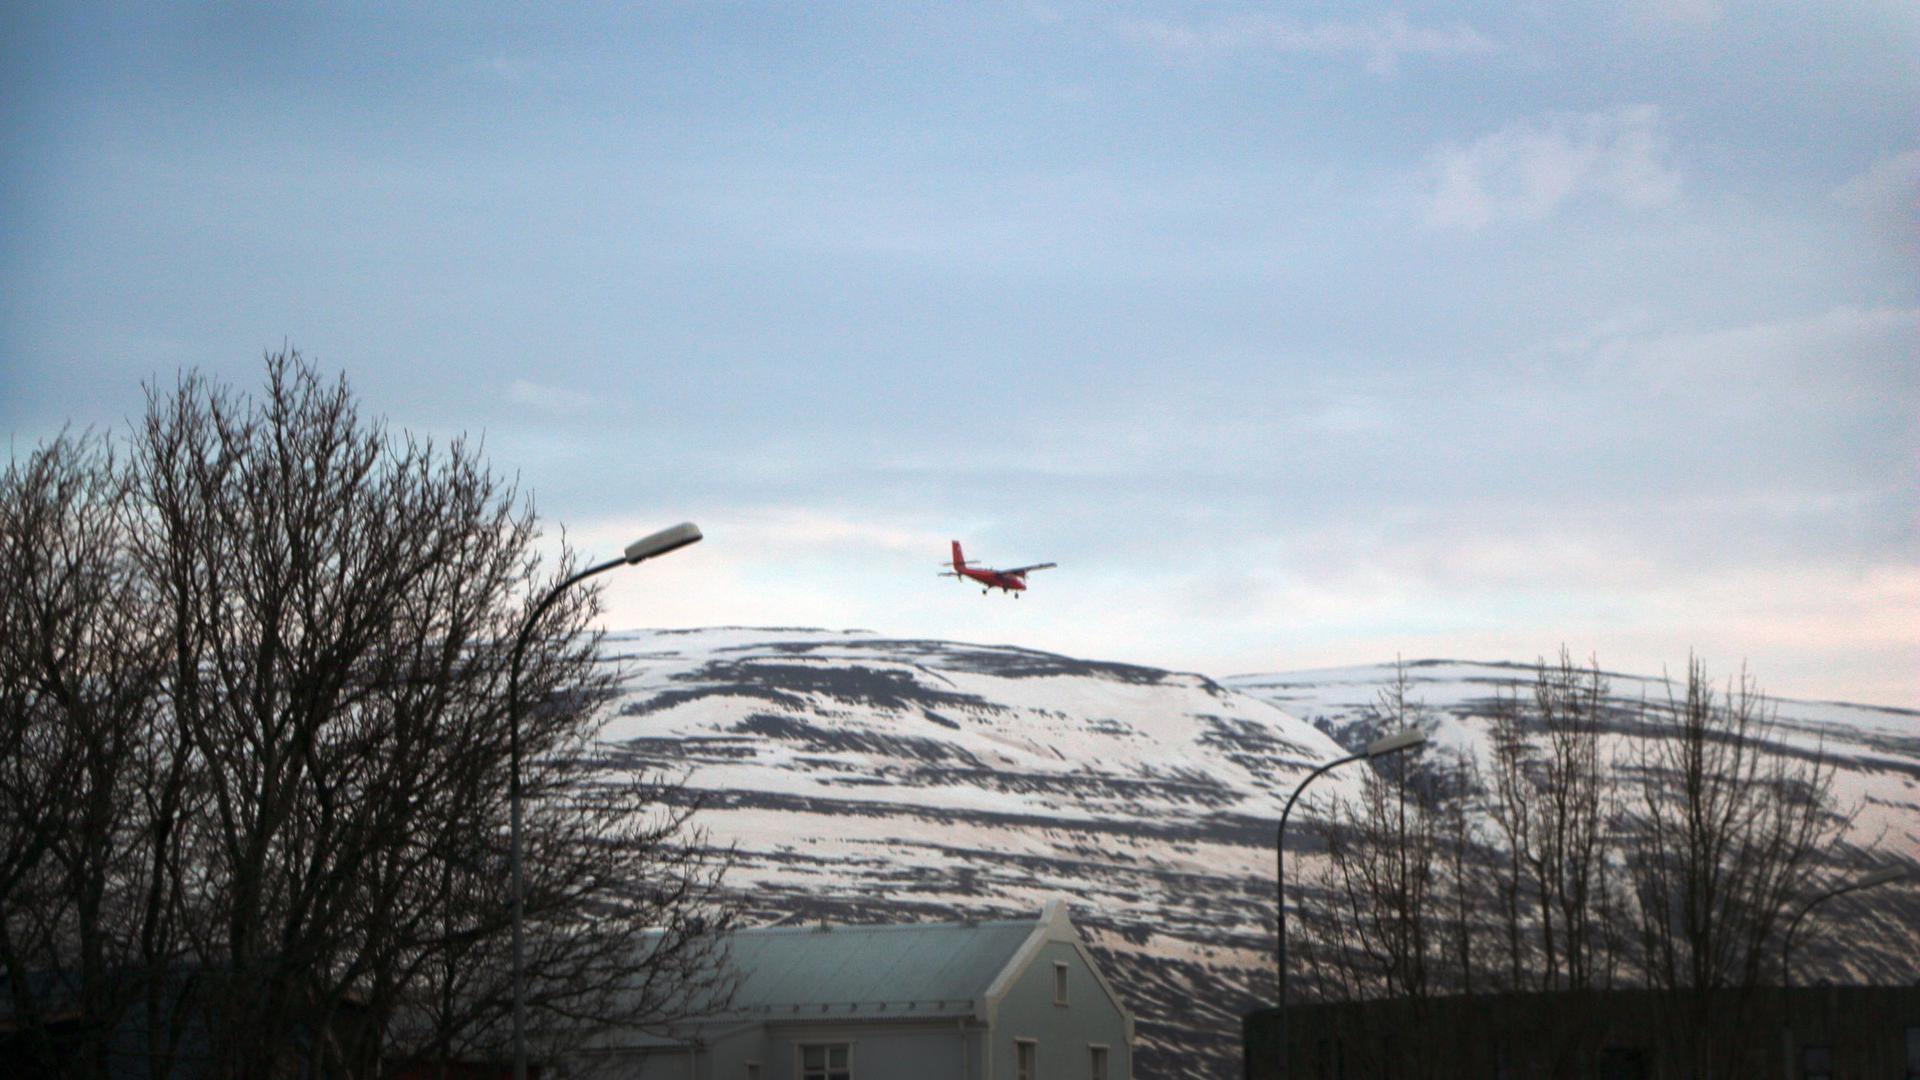 A red plane is seen in the sky above snow covered mountains and a small village